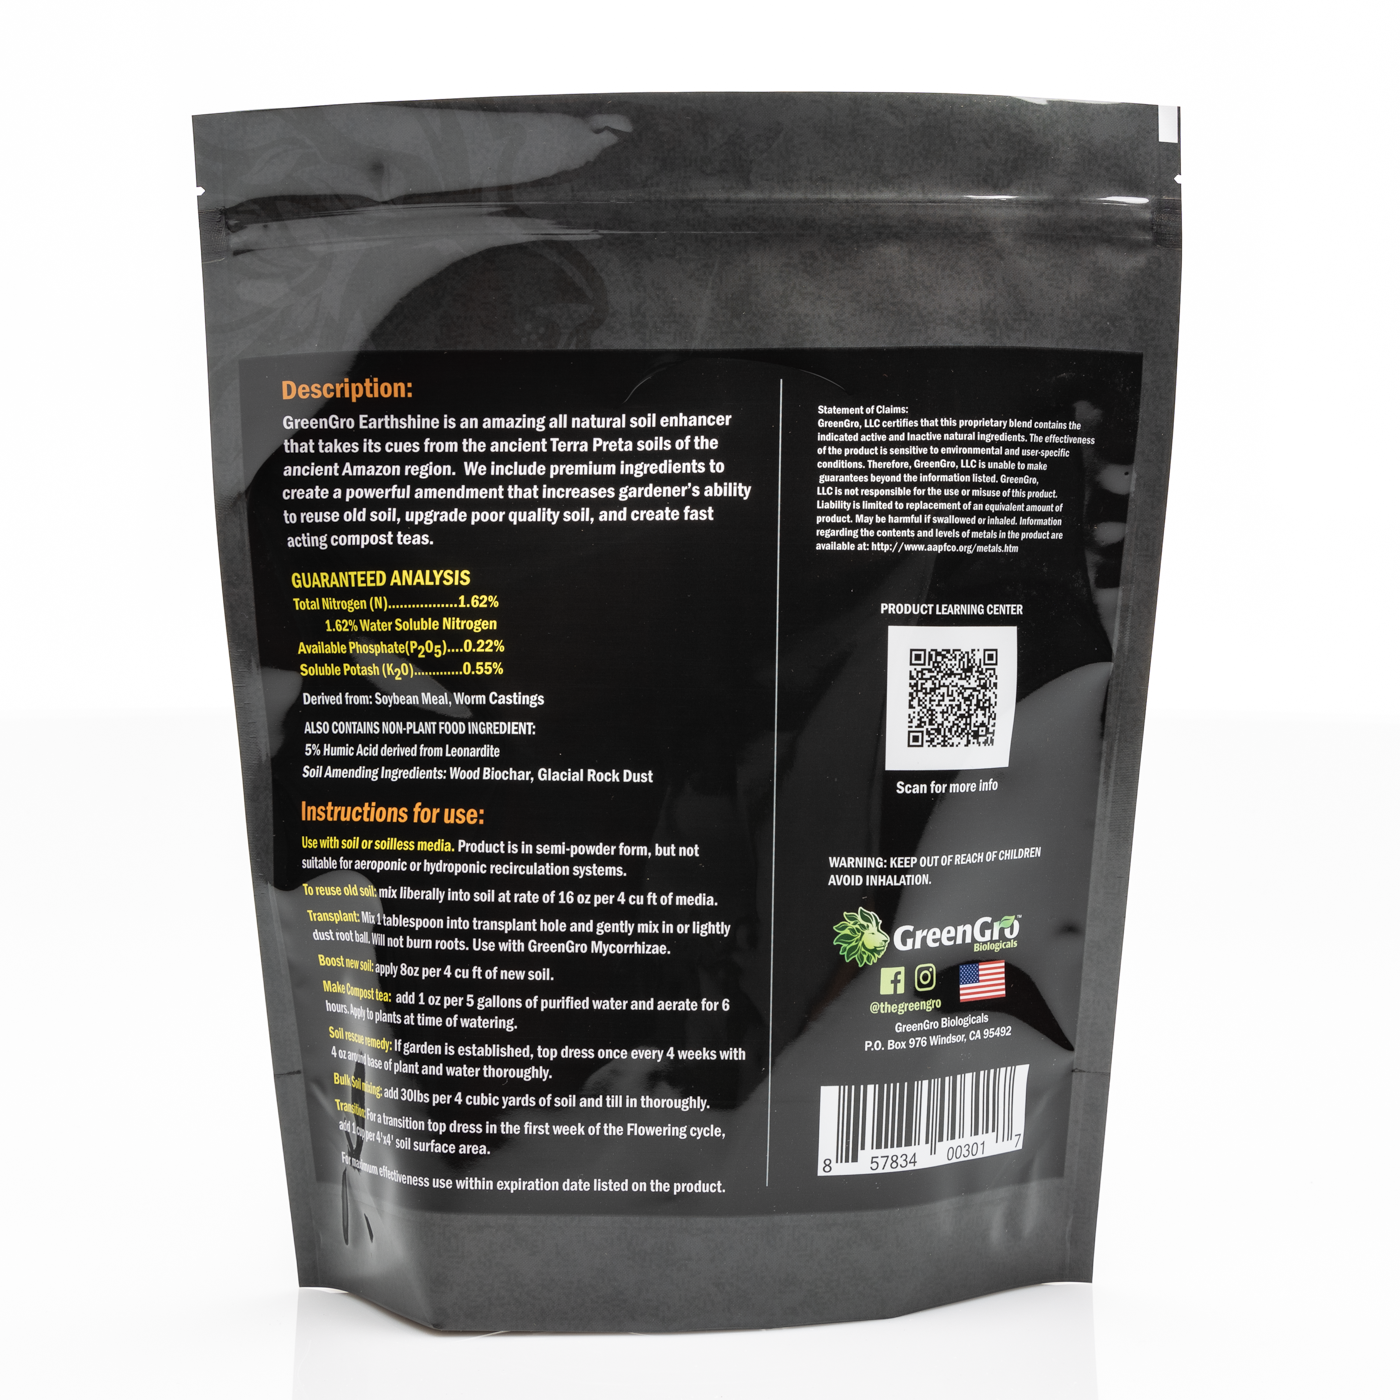 GreenGro Earthshine - Biochar & Humic Acid Blend/Activated Charcoal/Sequesters Carbon/Organic Soil Booster, Top Soil, Plant Food/Compost Tea Accelerator/Derived from Worm Castings